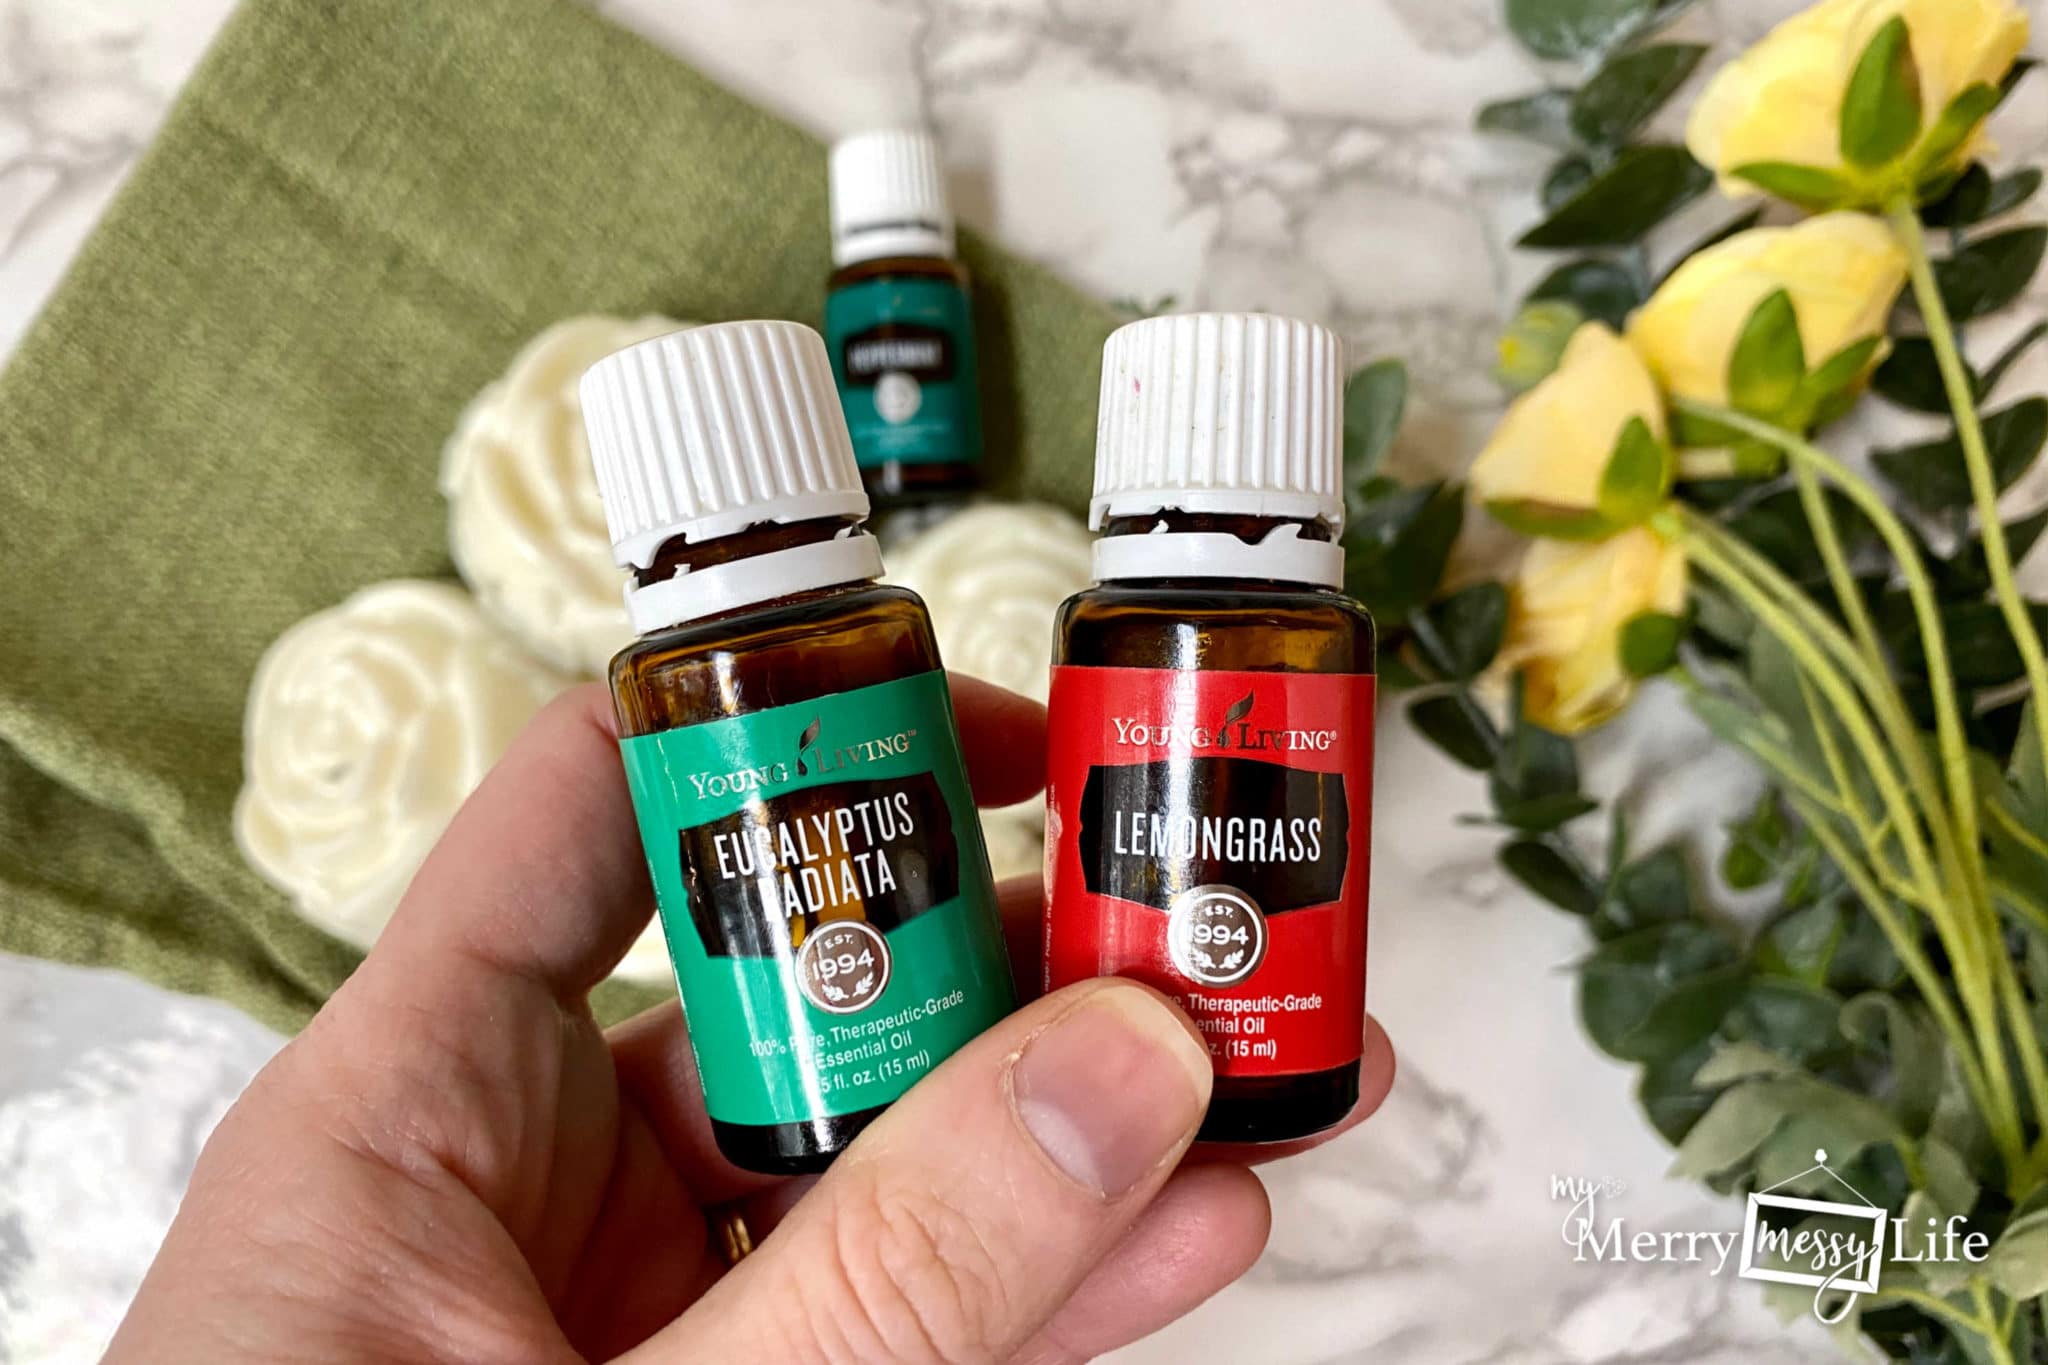 Lemon and Eucalyptus Essential Oils from Young Living Essential Oils to use in Castile Soap Bars recipe